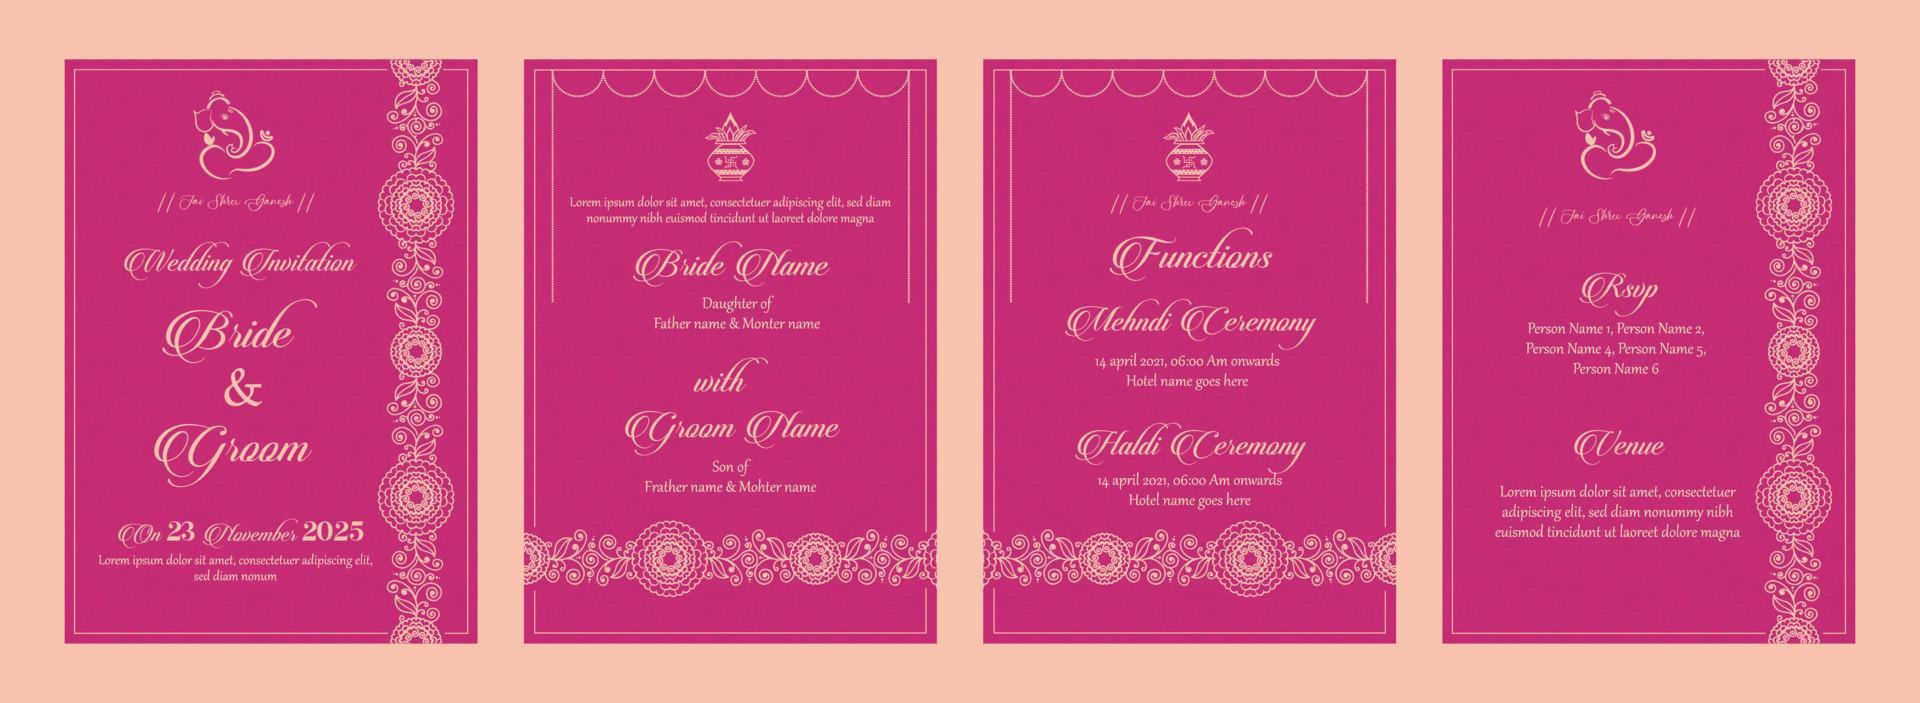 Indian wedding invitation card template ready to print vector